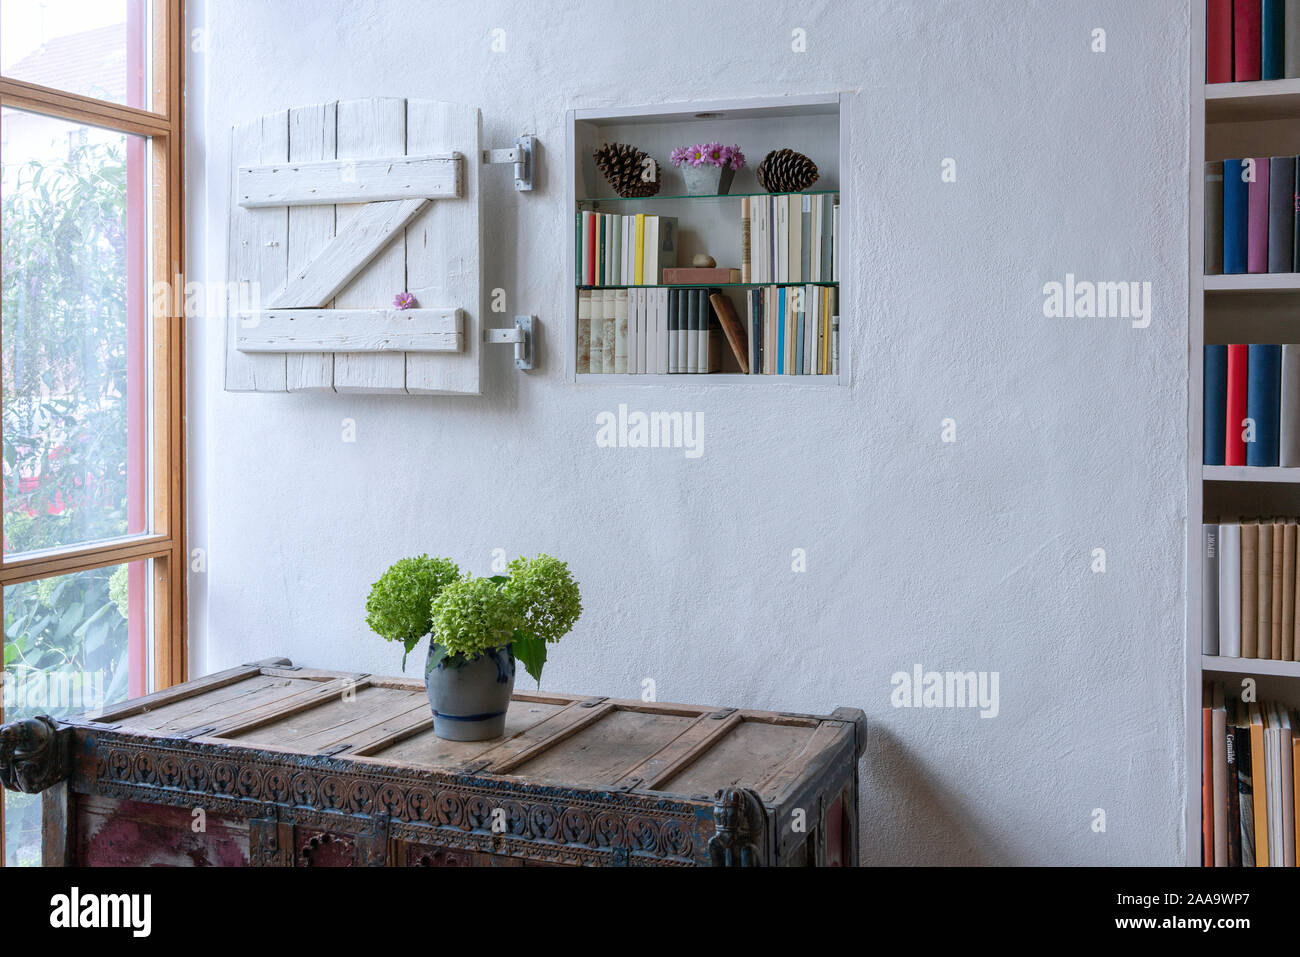 Entrance in a country house with flowers on a highboy and decorated bookshelves Stock Photo